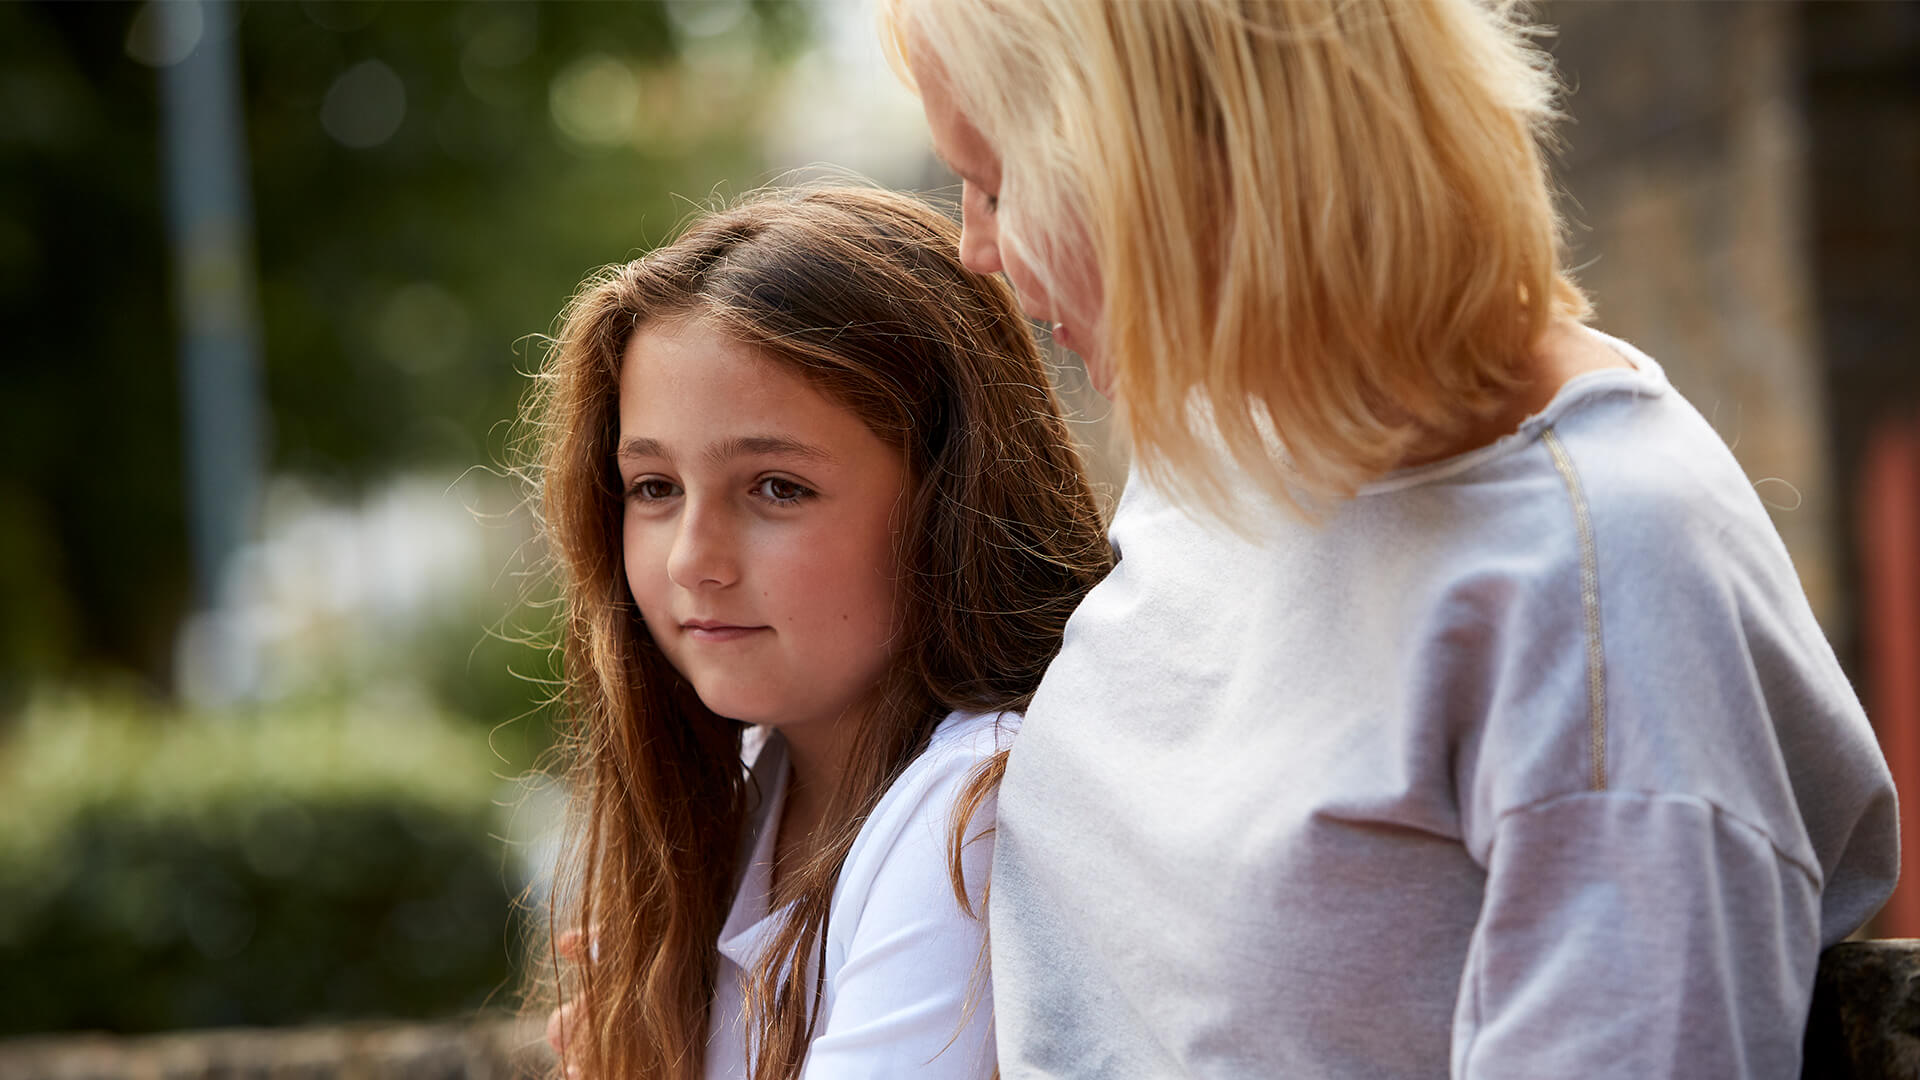 How parents can cope with their own back-to-school anxiety